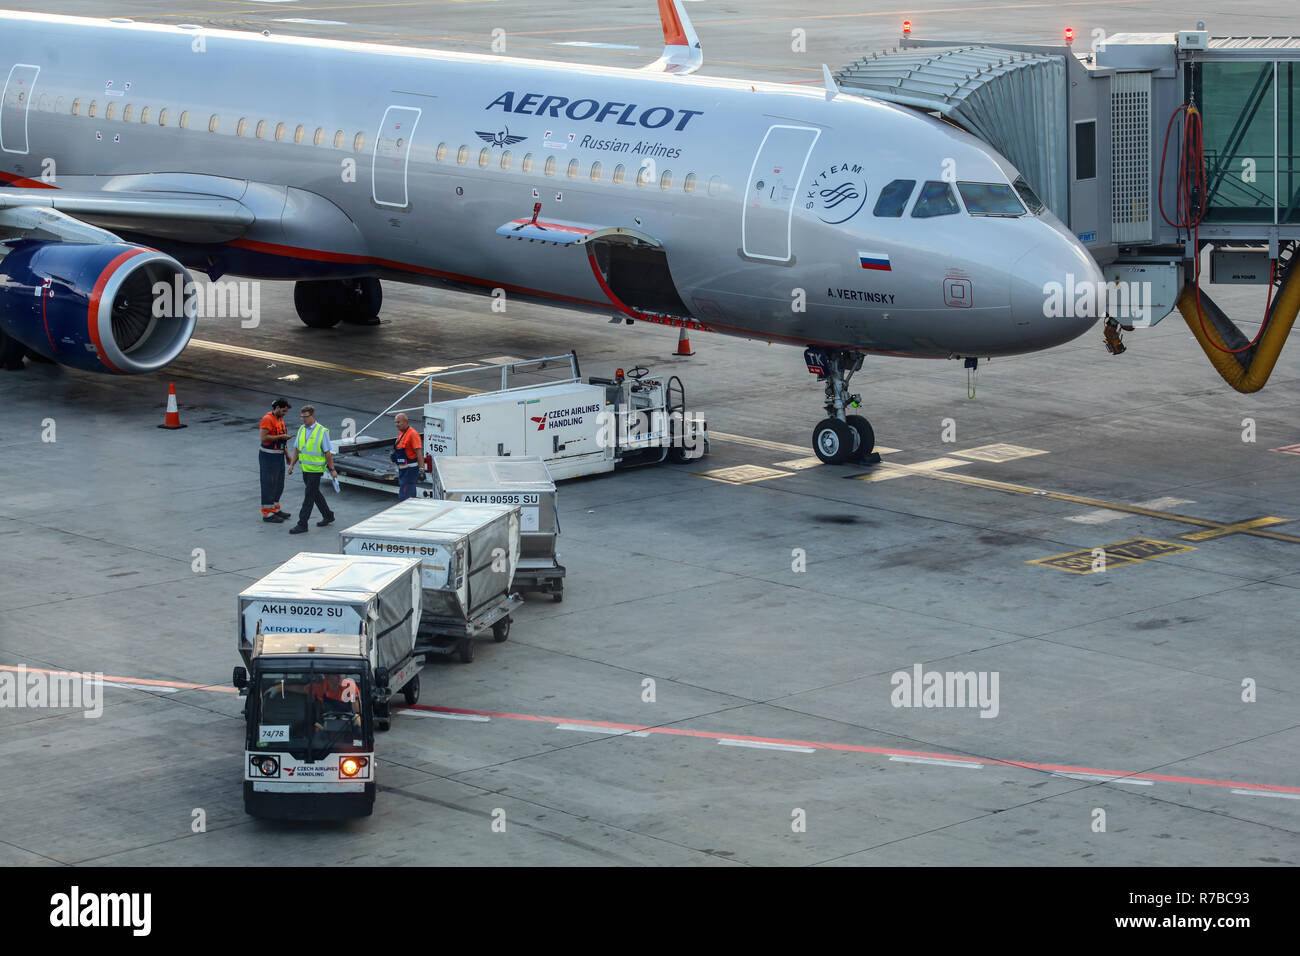 Prague, Czech Republic - July 28th, 2018: Ground personnel loading baggage cargo into Aeroflot Airbus A321 aircraft on Ruzyne, Vaclav Havel Airport. F Stock Photo